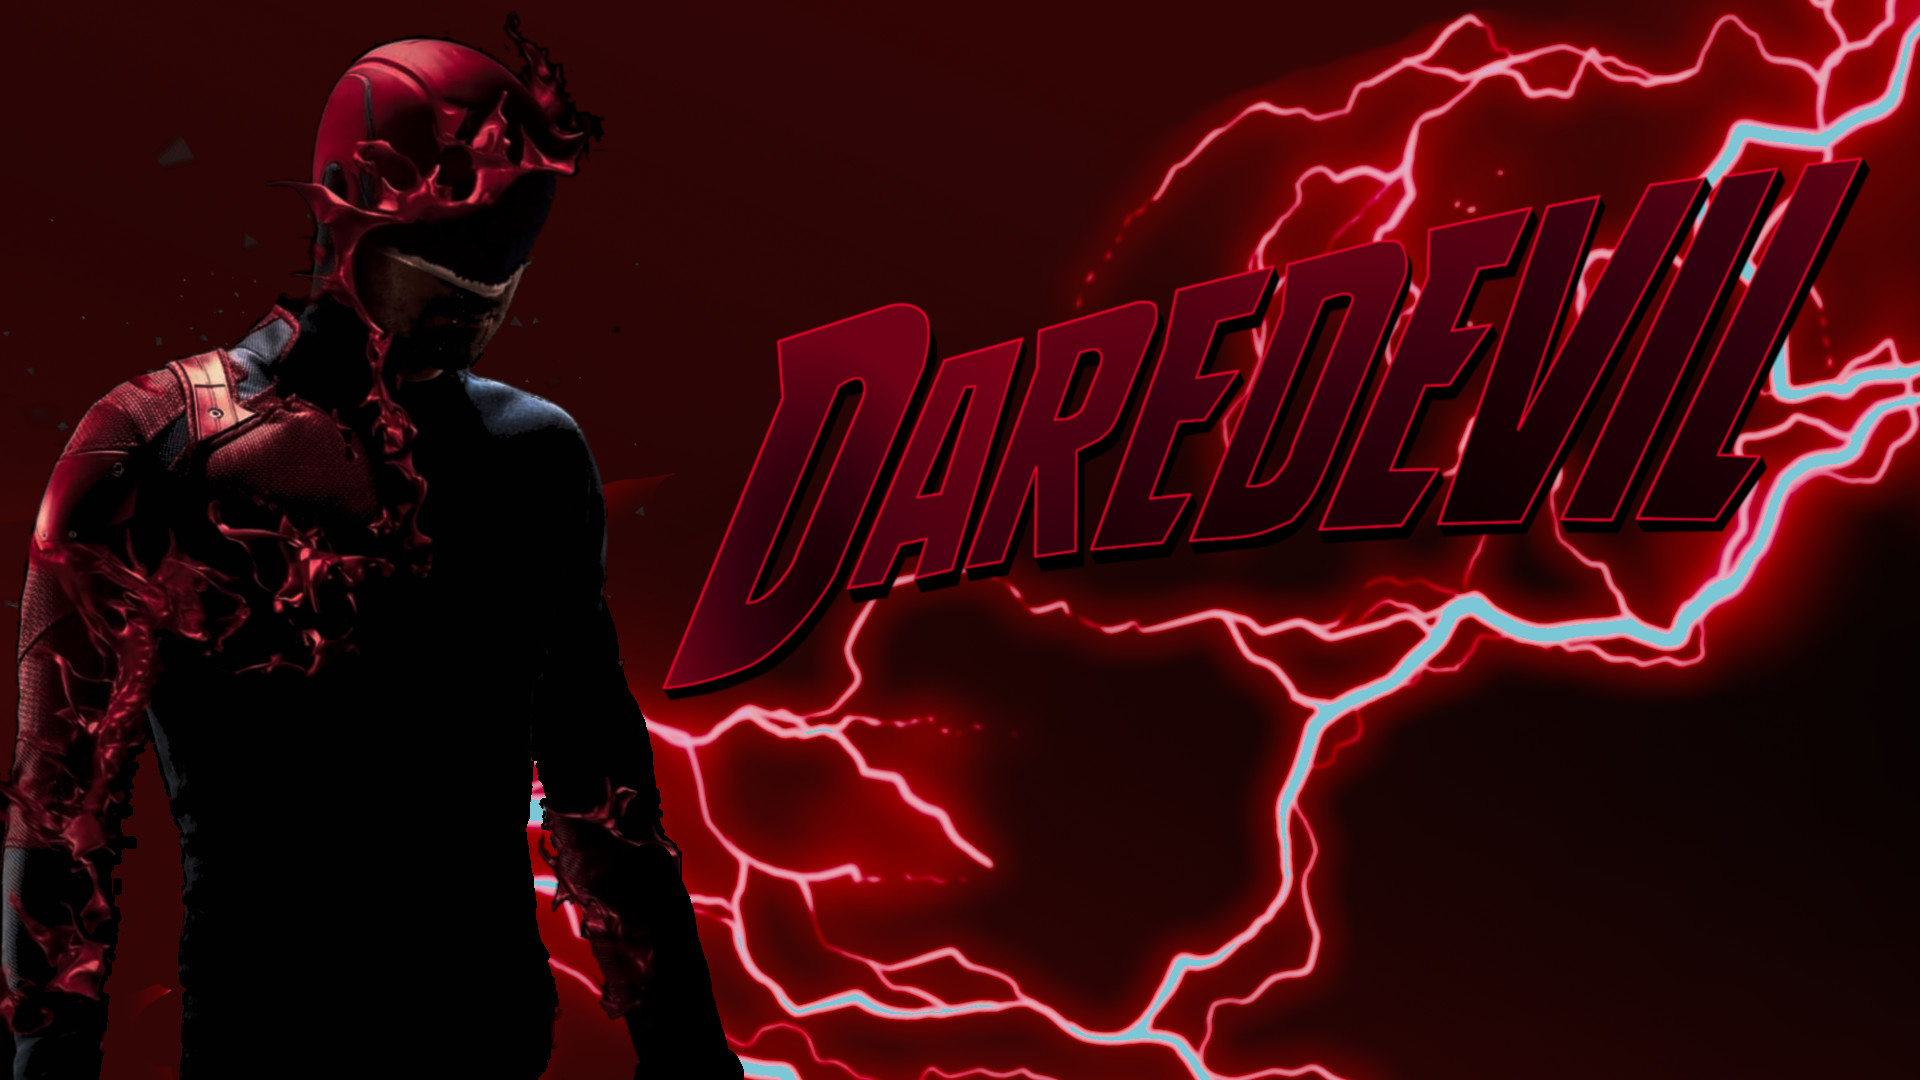 1920x1080 Daredevil images Daredevil Wallpaper HD wallpaper and background photos